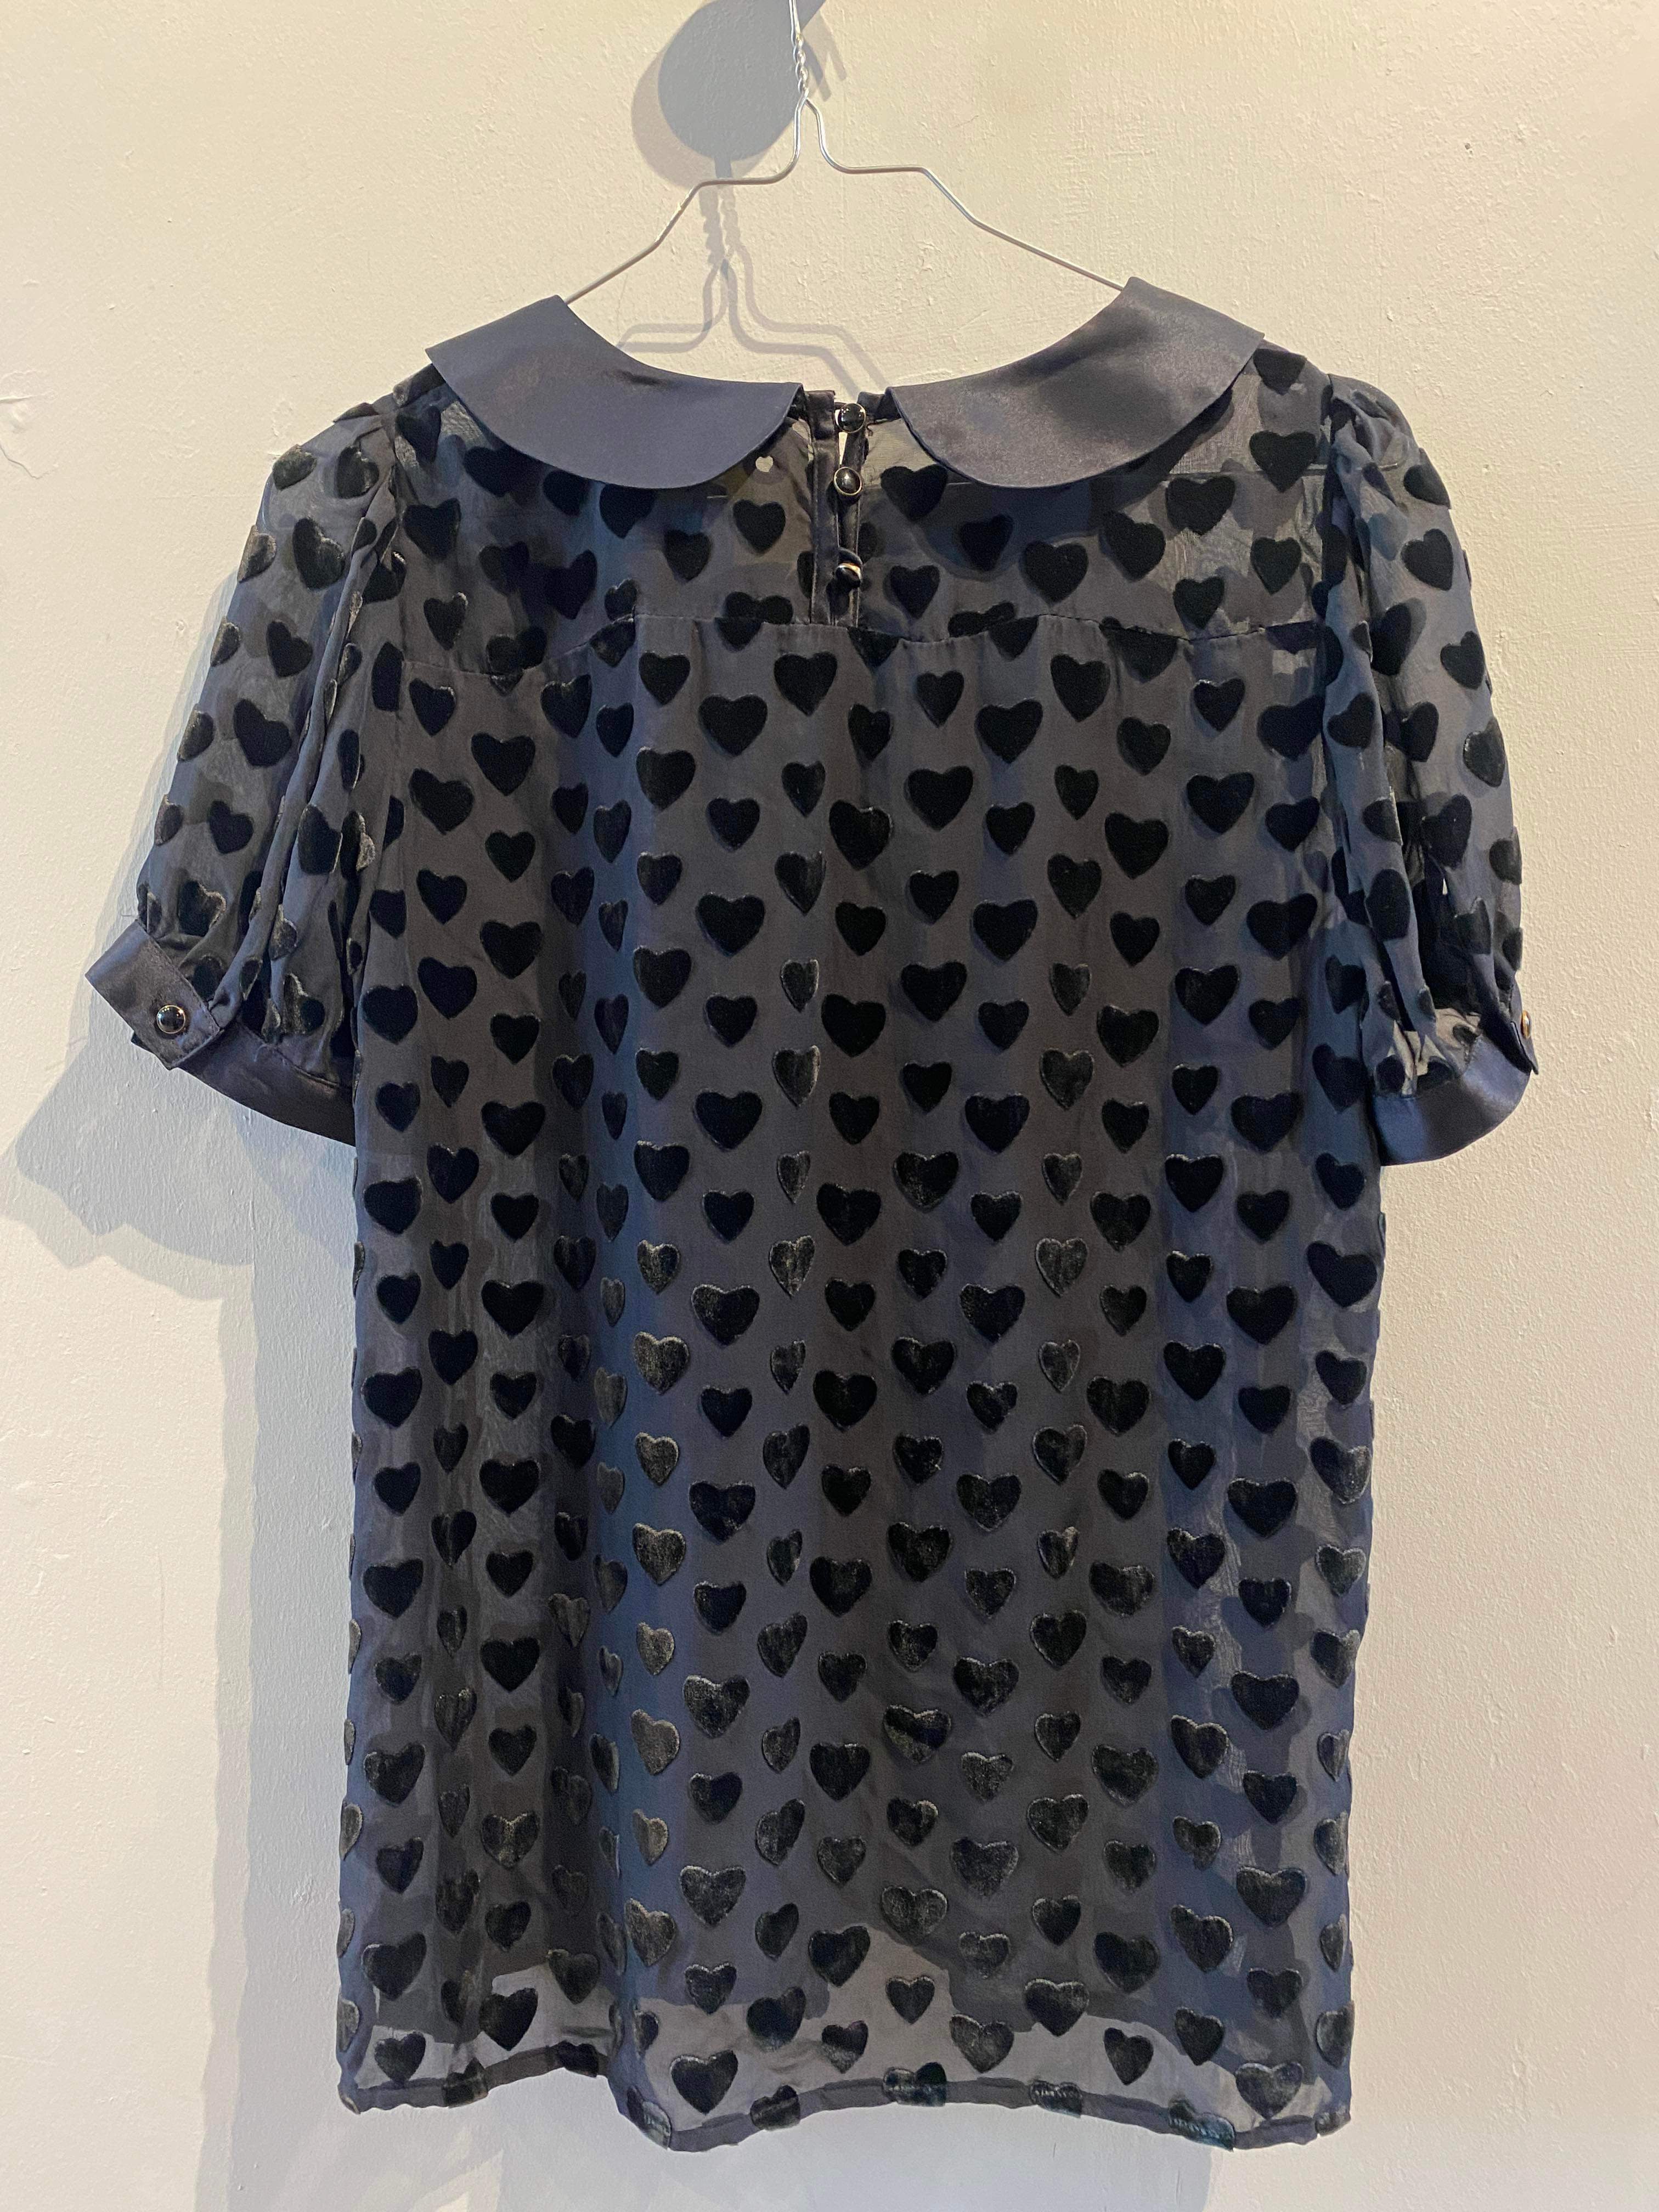 Marc Jacobs - Top - Size: S